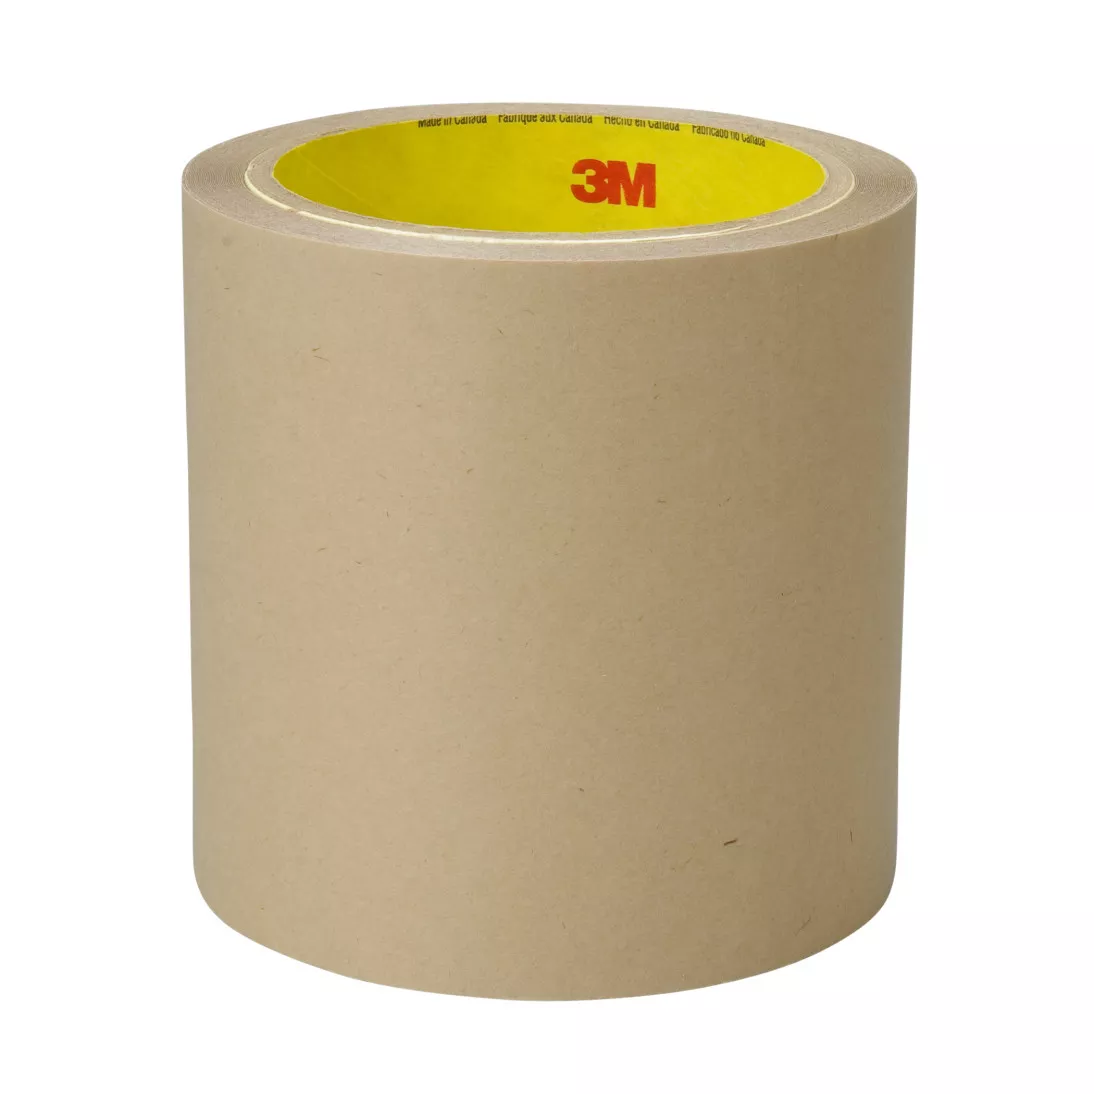 3M™ Double Coated Tape 9500PC, Clear, 1 1/2 in x 36 yd, 5.6 mil, 24
rolls per case